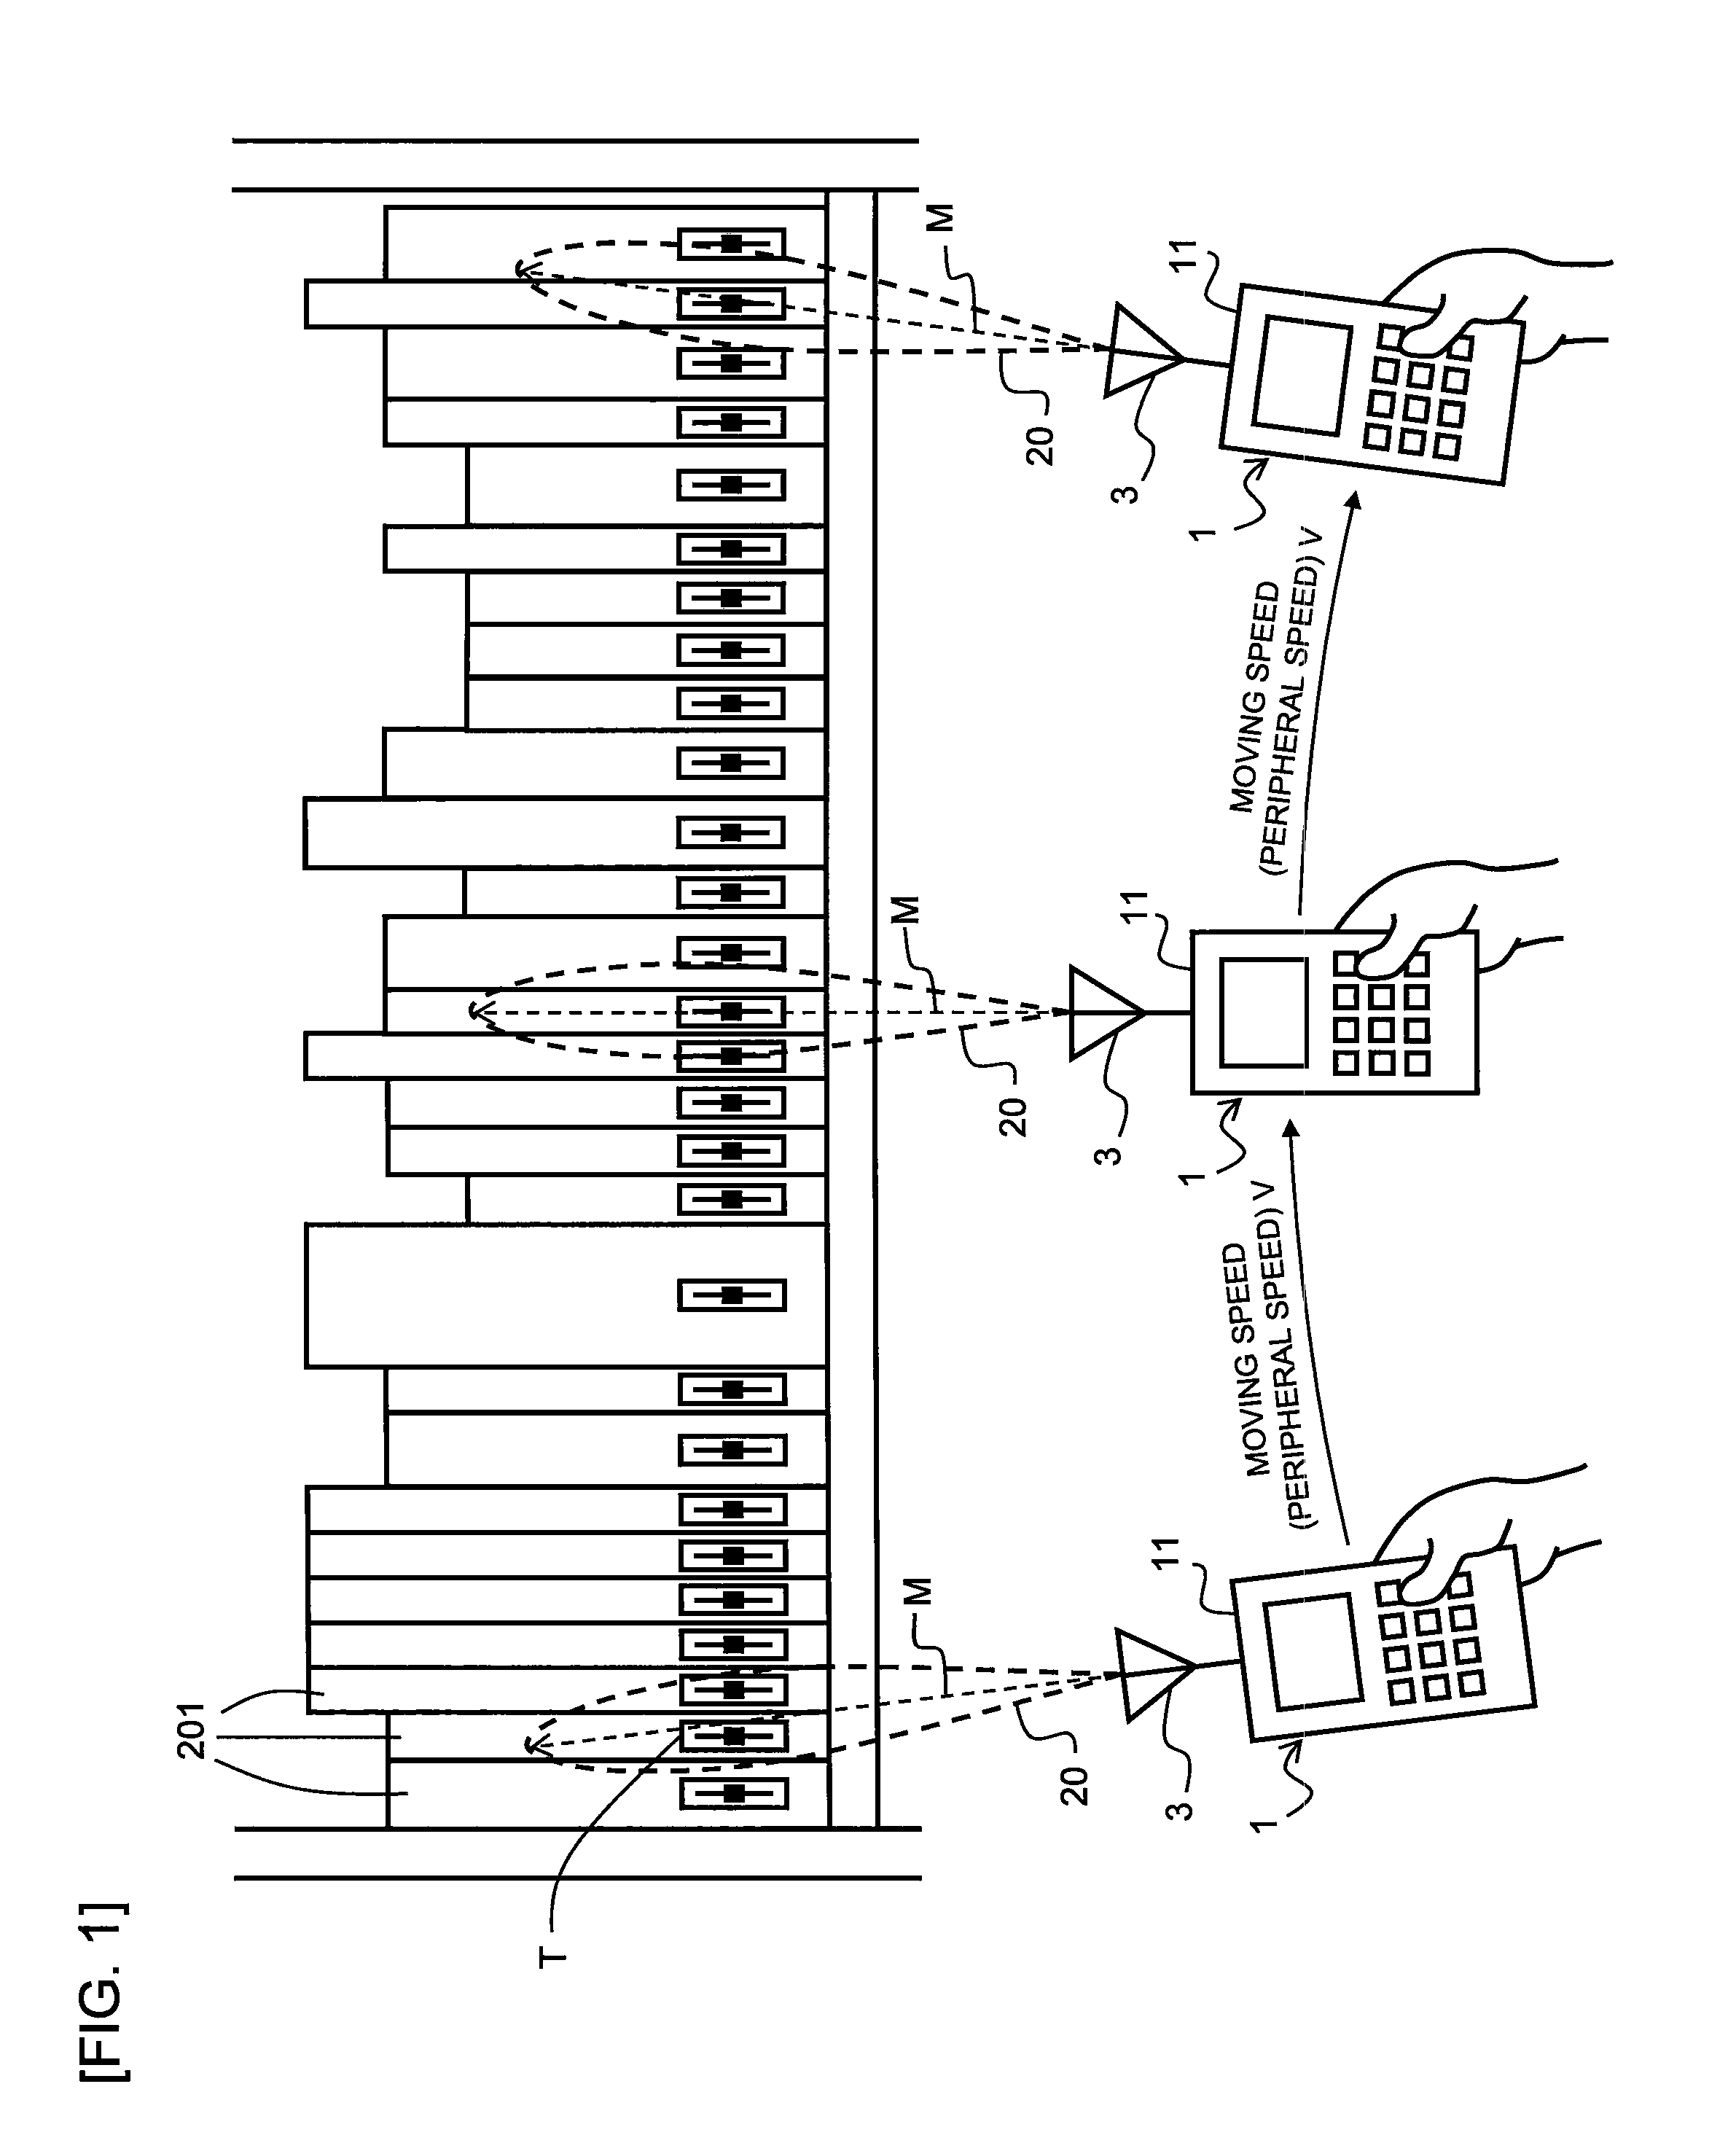 Apparatus for communicating with RFID tag